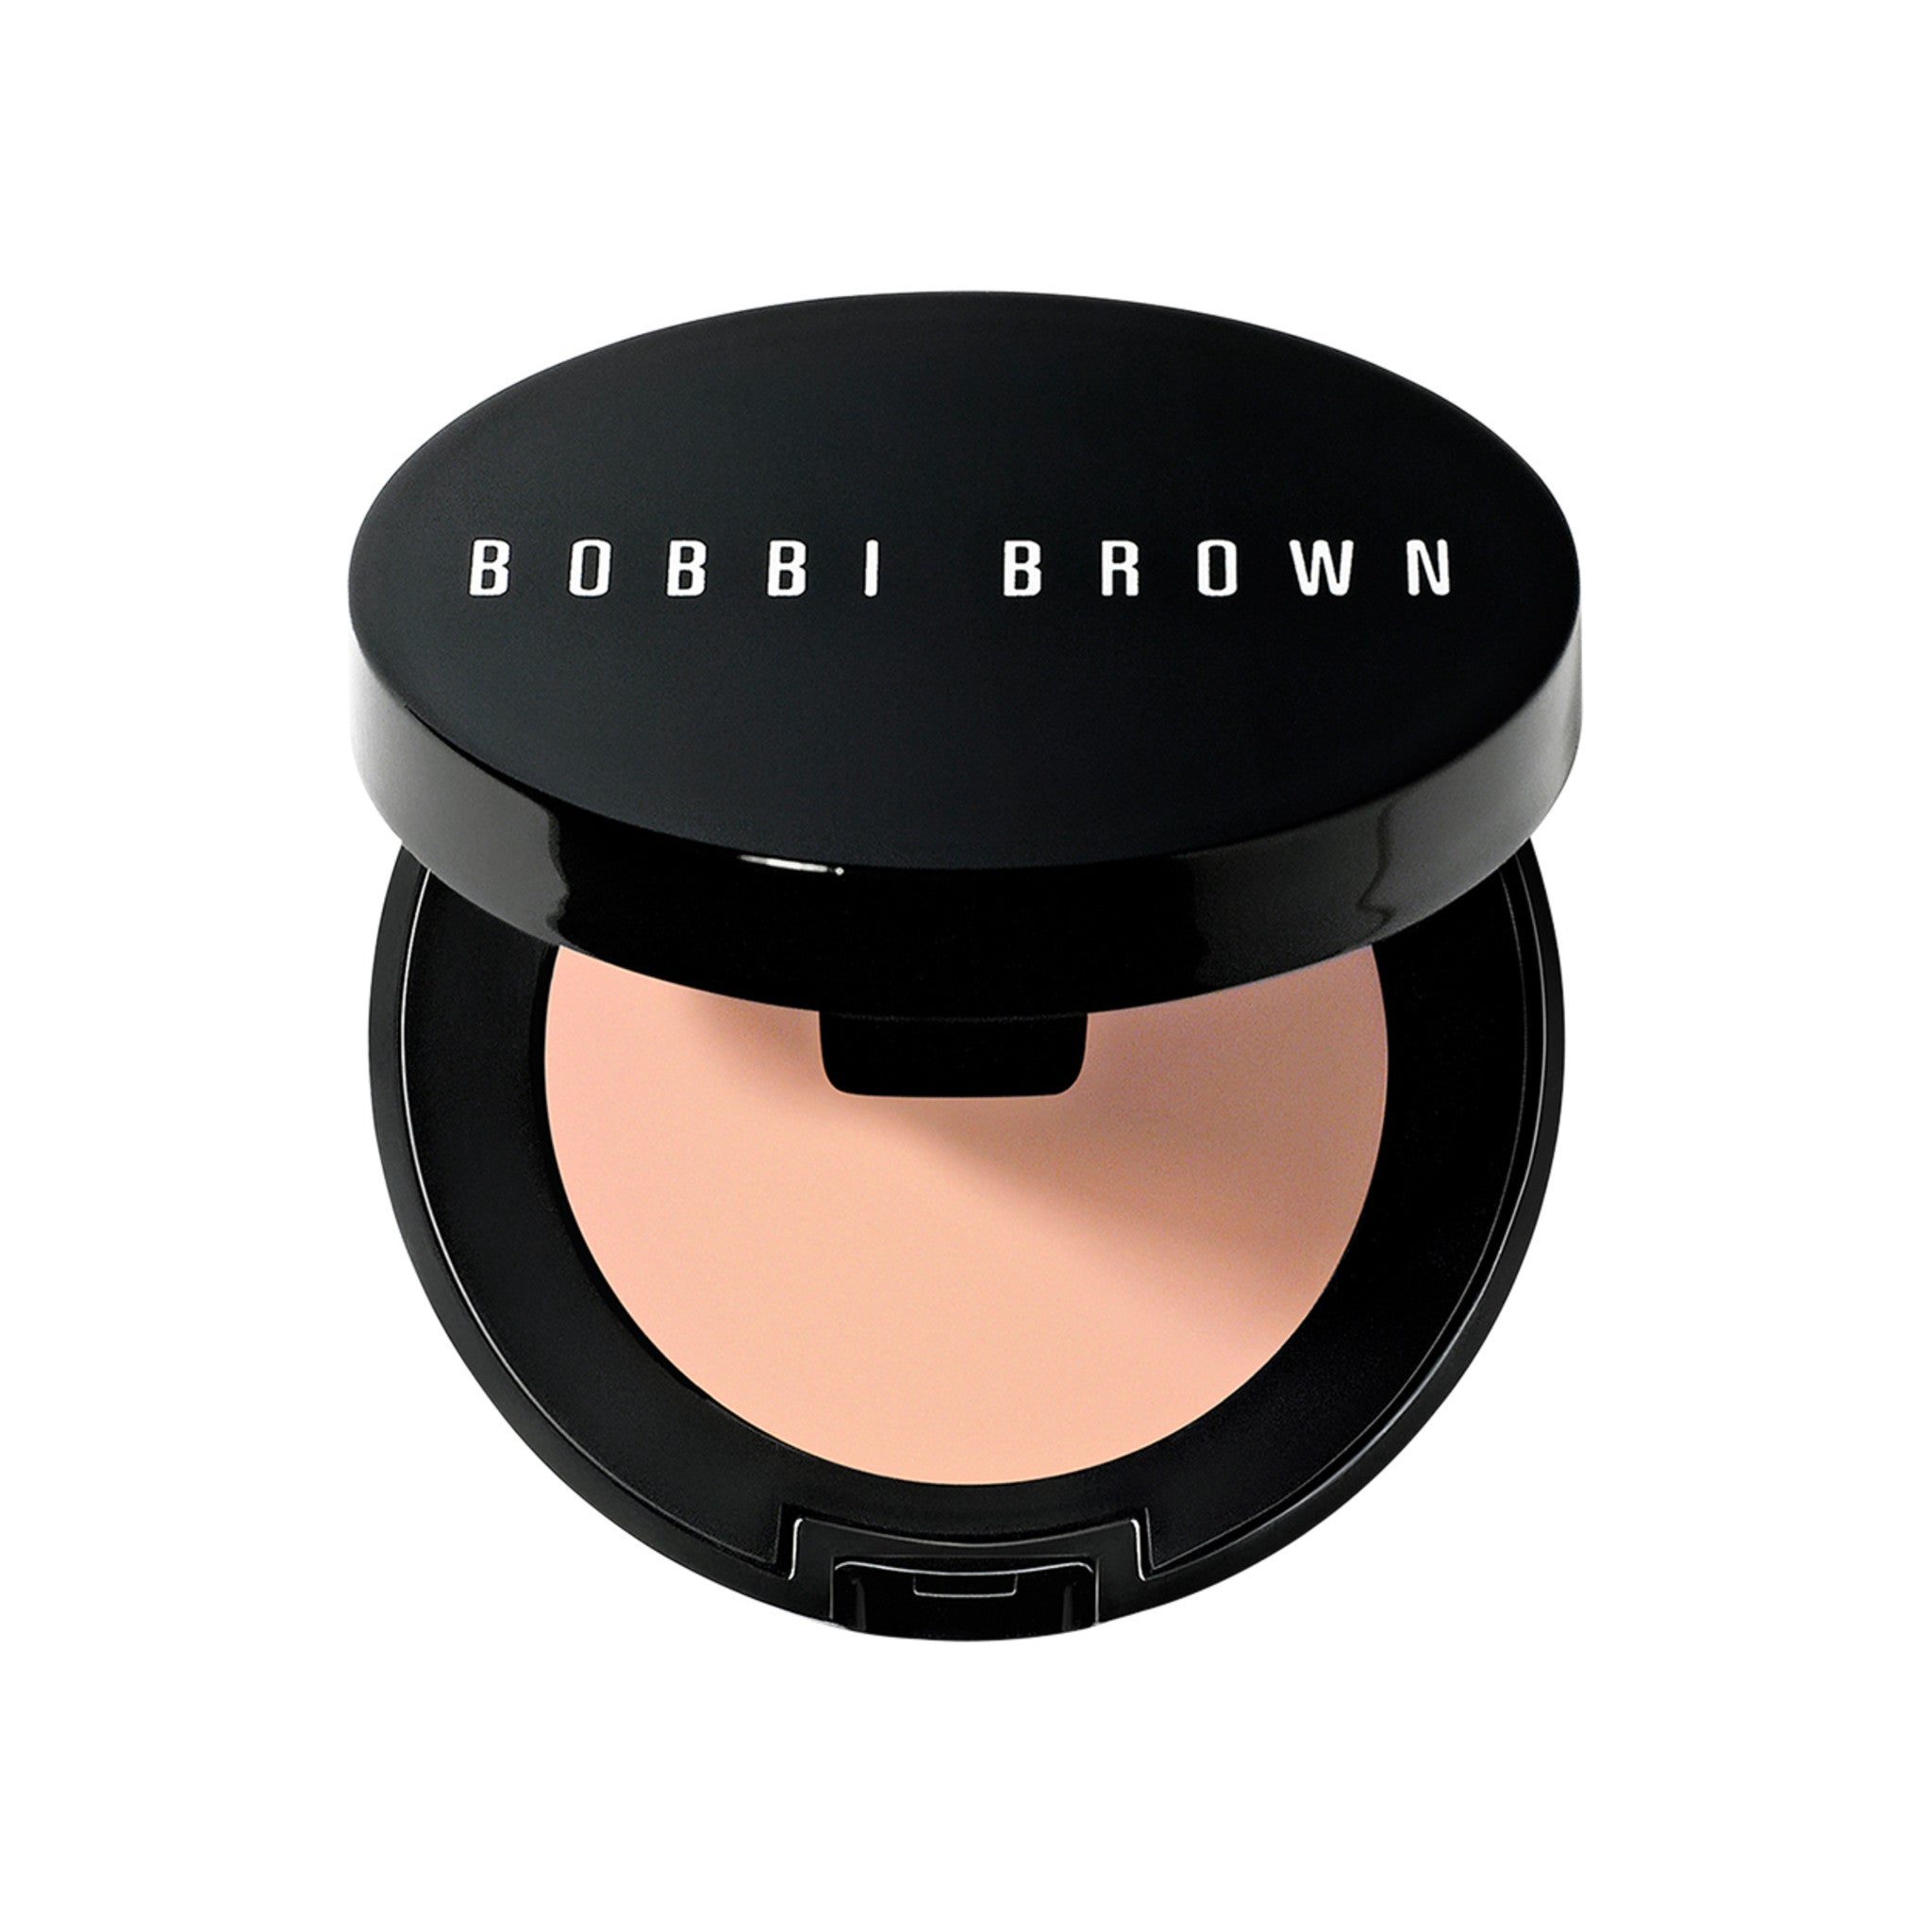 Bobbi Brown Under Eye Corrector Color/Shade variant: Porcelain Bisque main image. This product is in the color nude, for light cool pink complexions